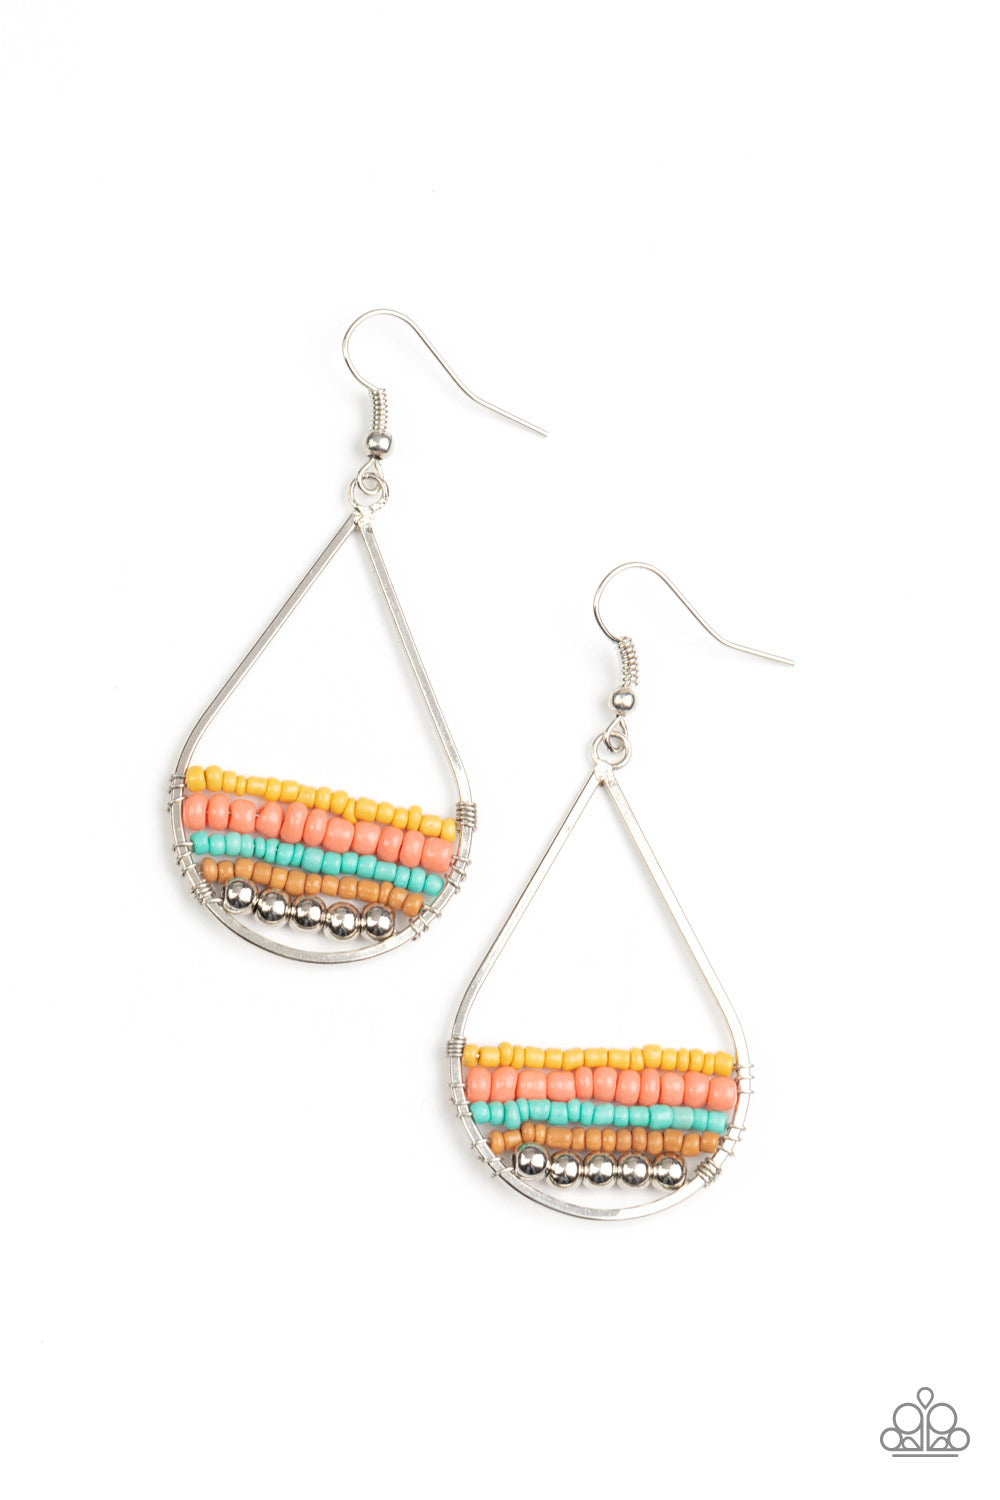 Mojave Mardi Gras - Multi Color - Silver Earrings - Paparazzi Accessories - Infused with a row of classic silver beads, a collection of yellow, coral, turquoise, and brown beads are threaded along dainty wires at the bottom of a silver teardrop frame for a seasonal look.